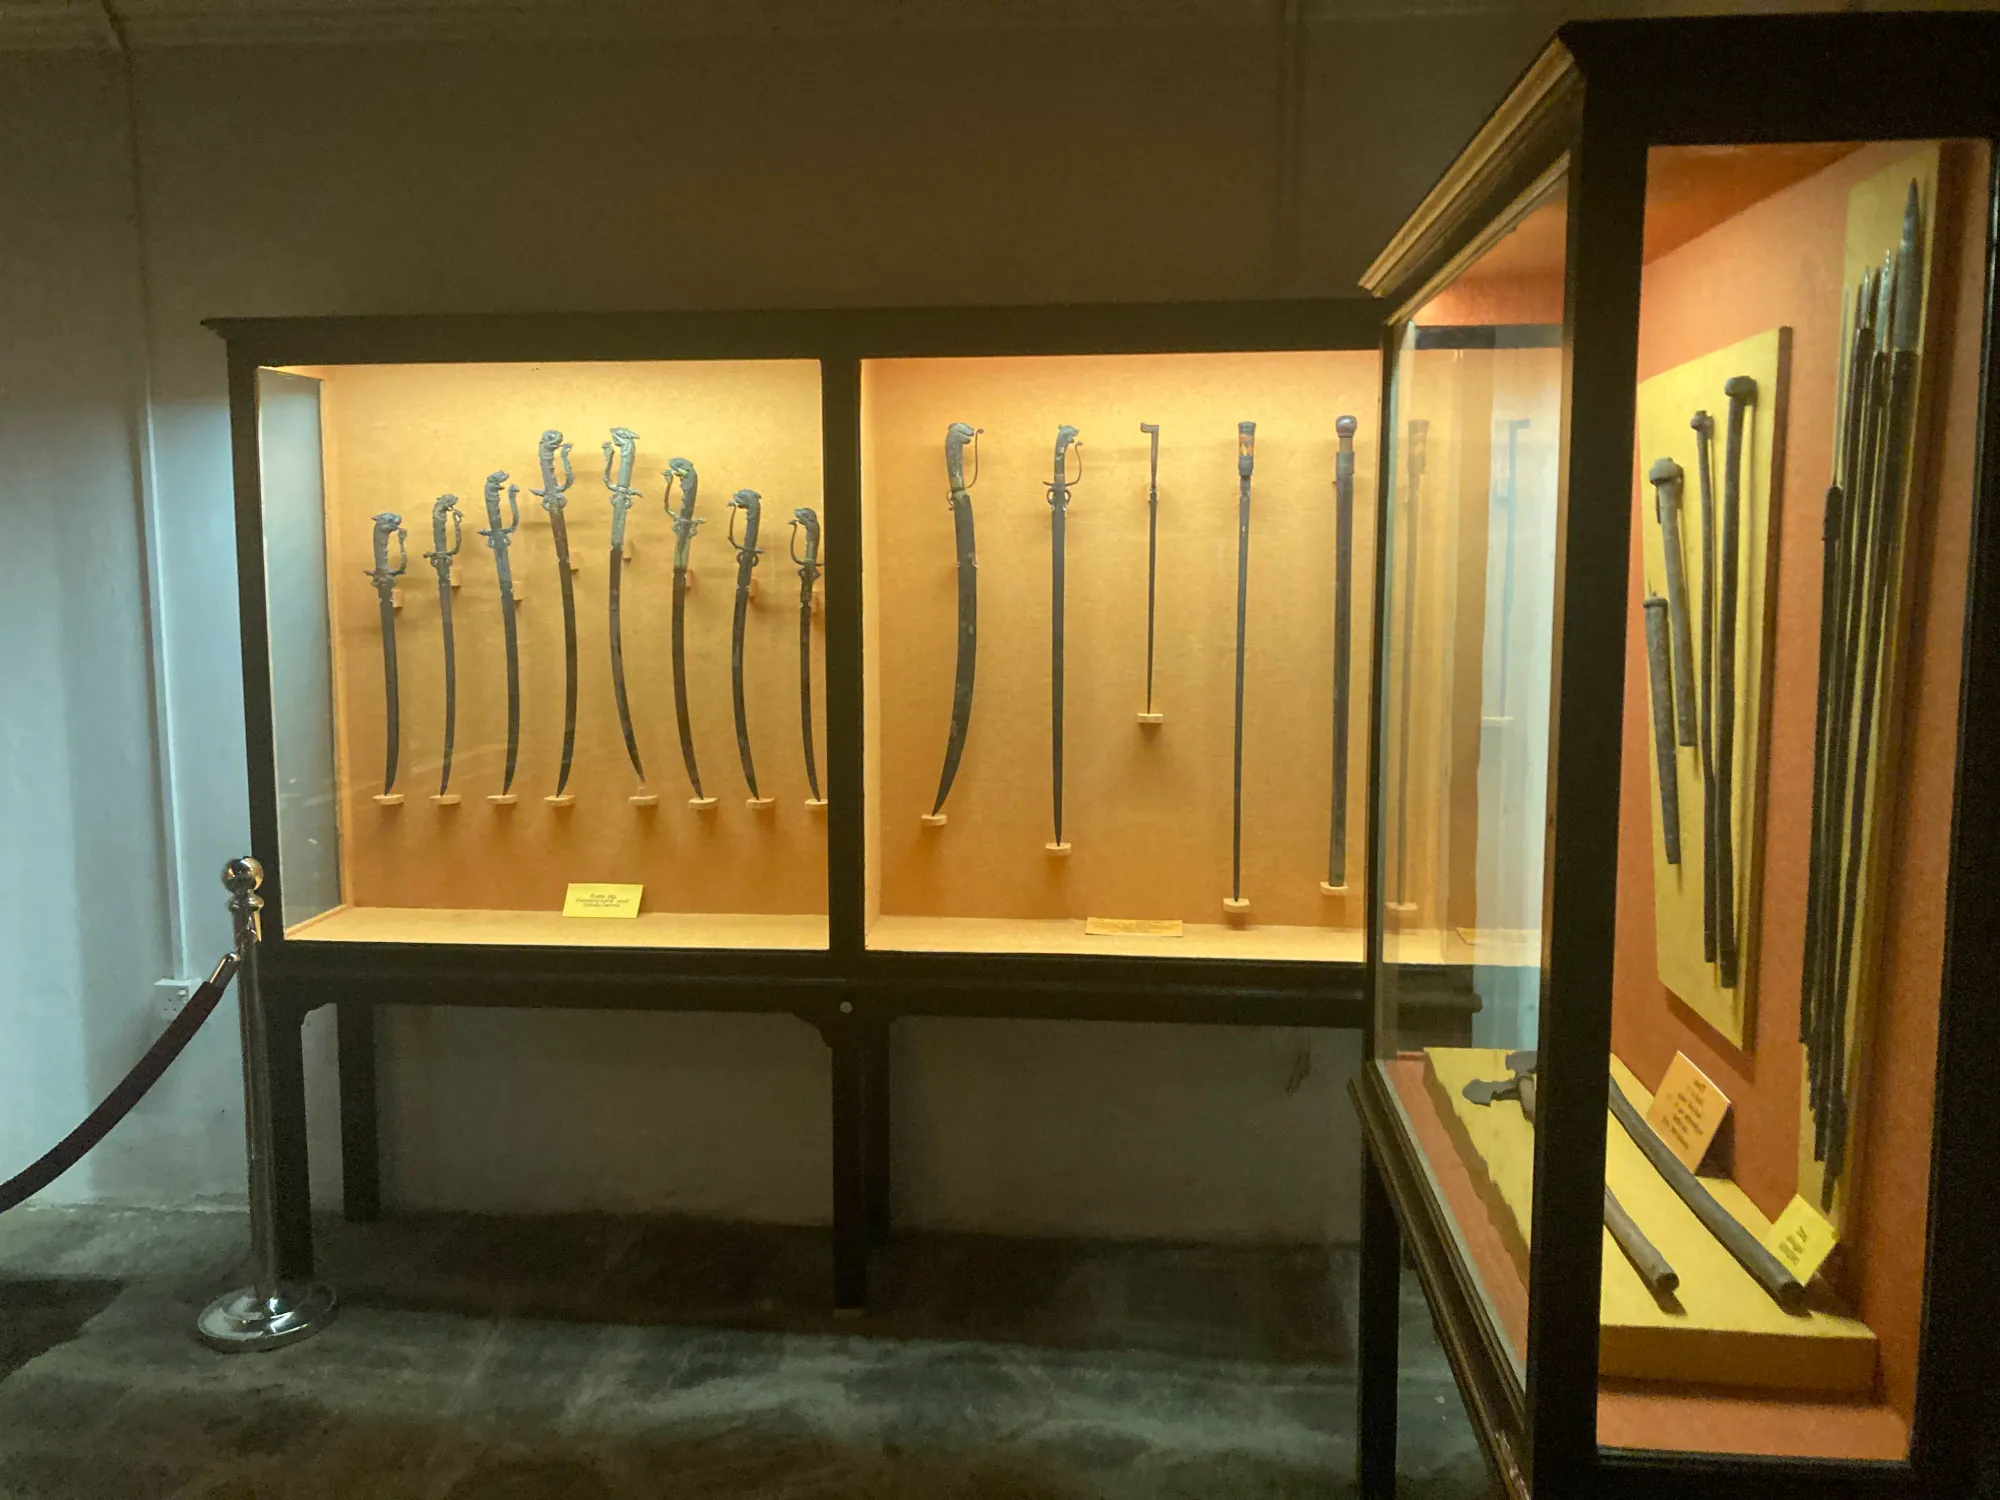 Swords, axes, spears and other weapons at the Kandy National Museum, Sri Lanka